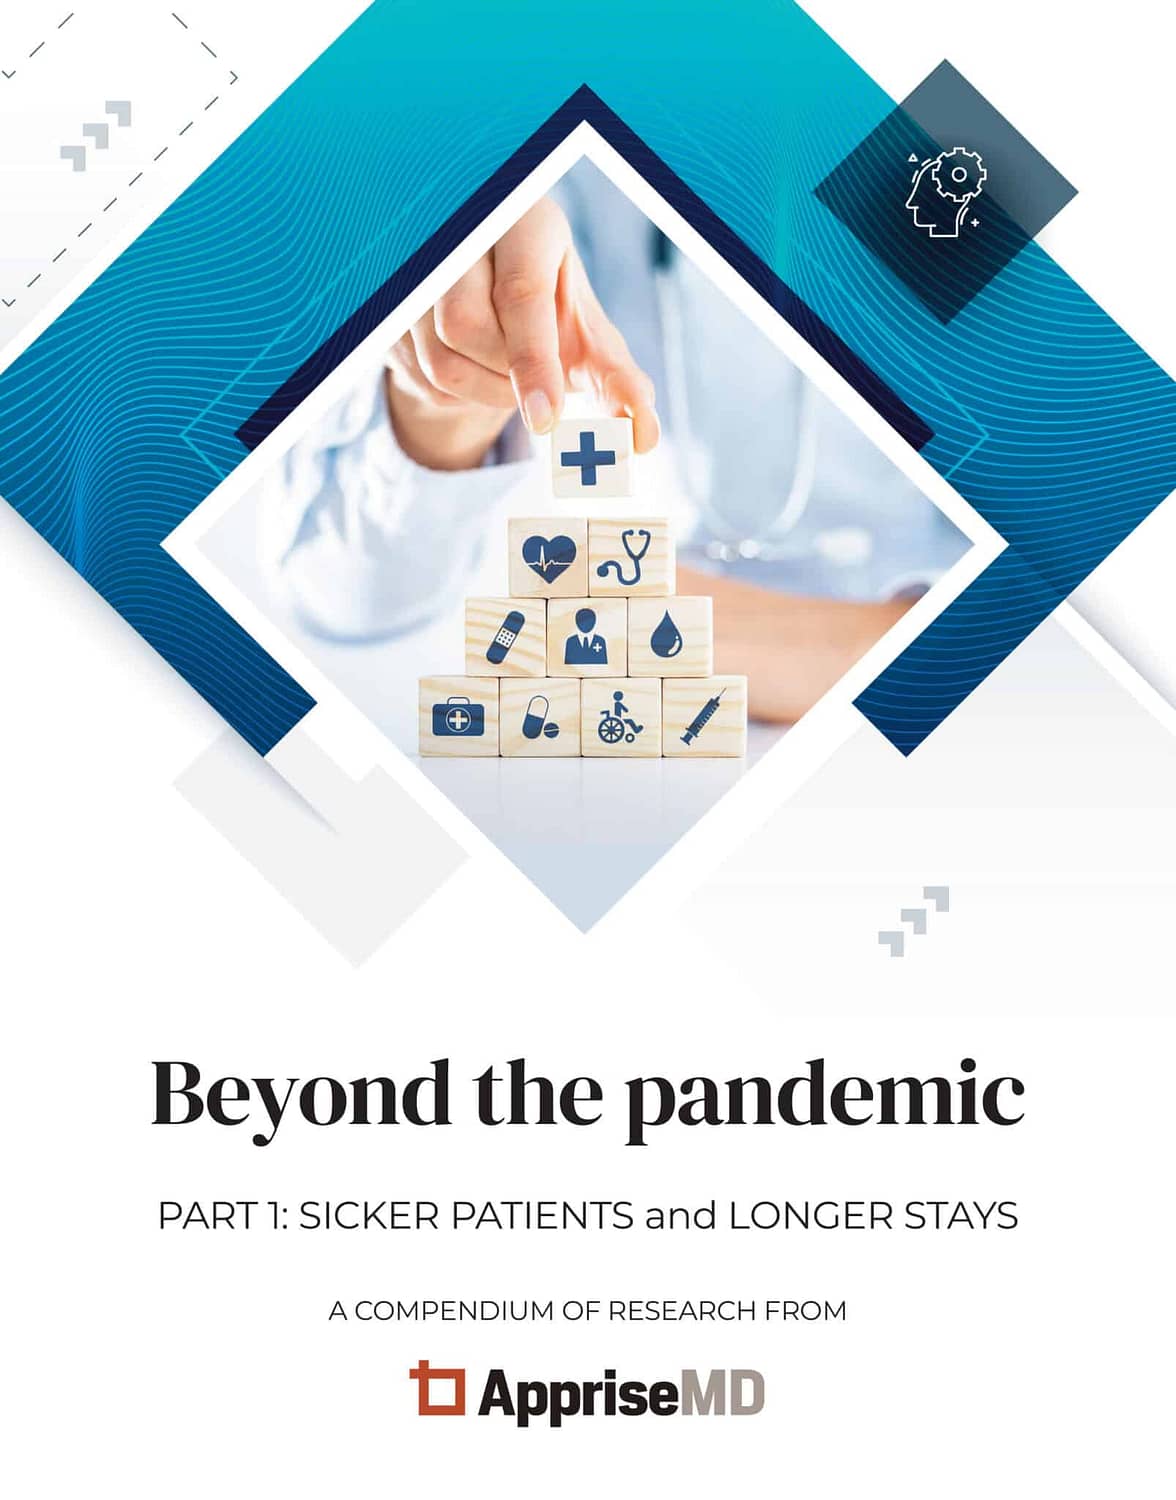 Beyond the pandemic, Part 1 sicker patients and longer stays, a compendium of research from AppriseMD